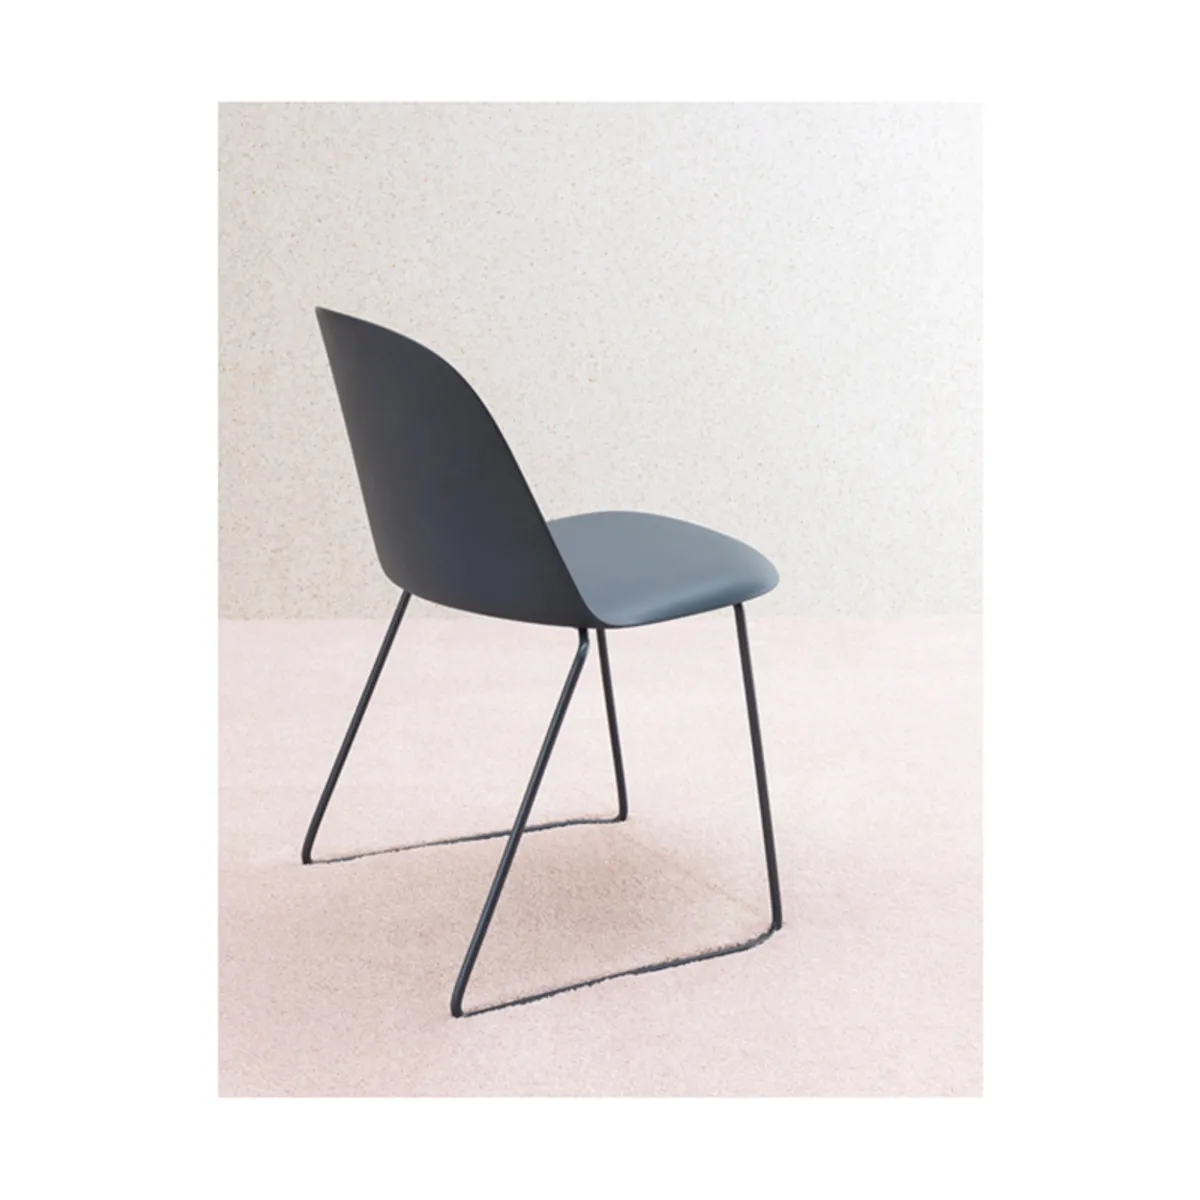 Mariolina Metal Chair For Casual Dining Cafes And Restaurants And Furniture For Educational Settings With Sled Base 124